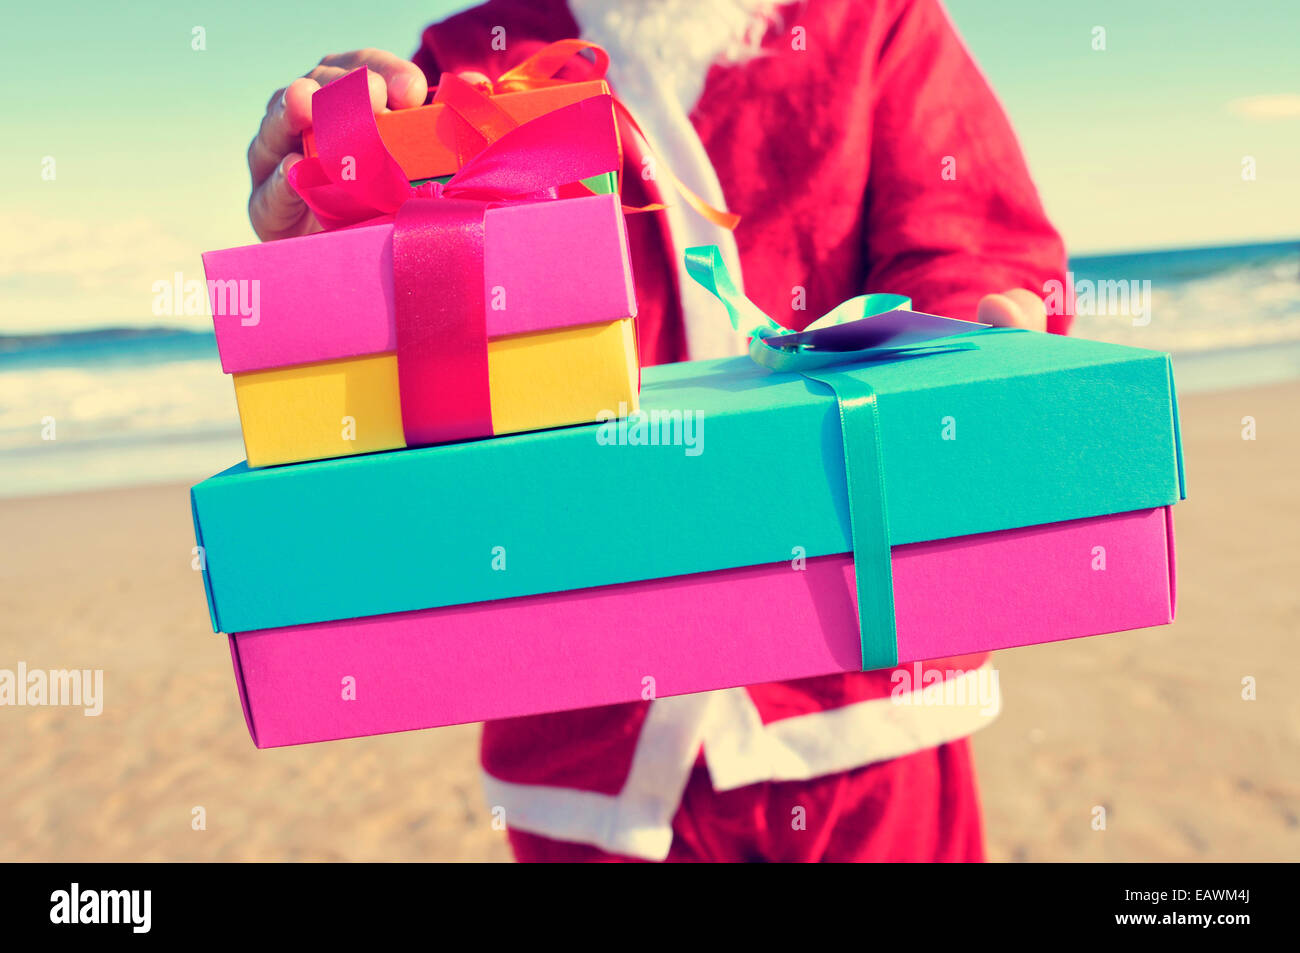 santa claus carrying a pile of gifts on the beach Stock Photo